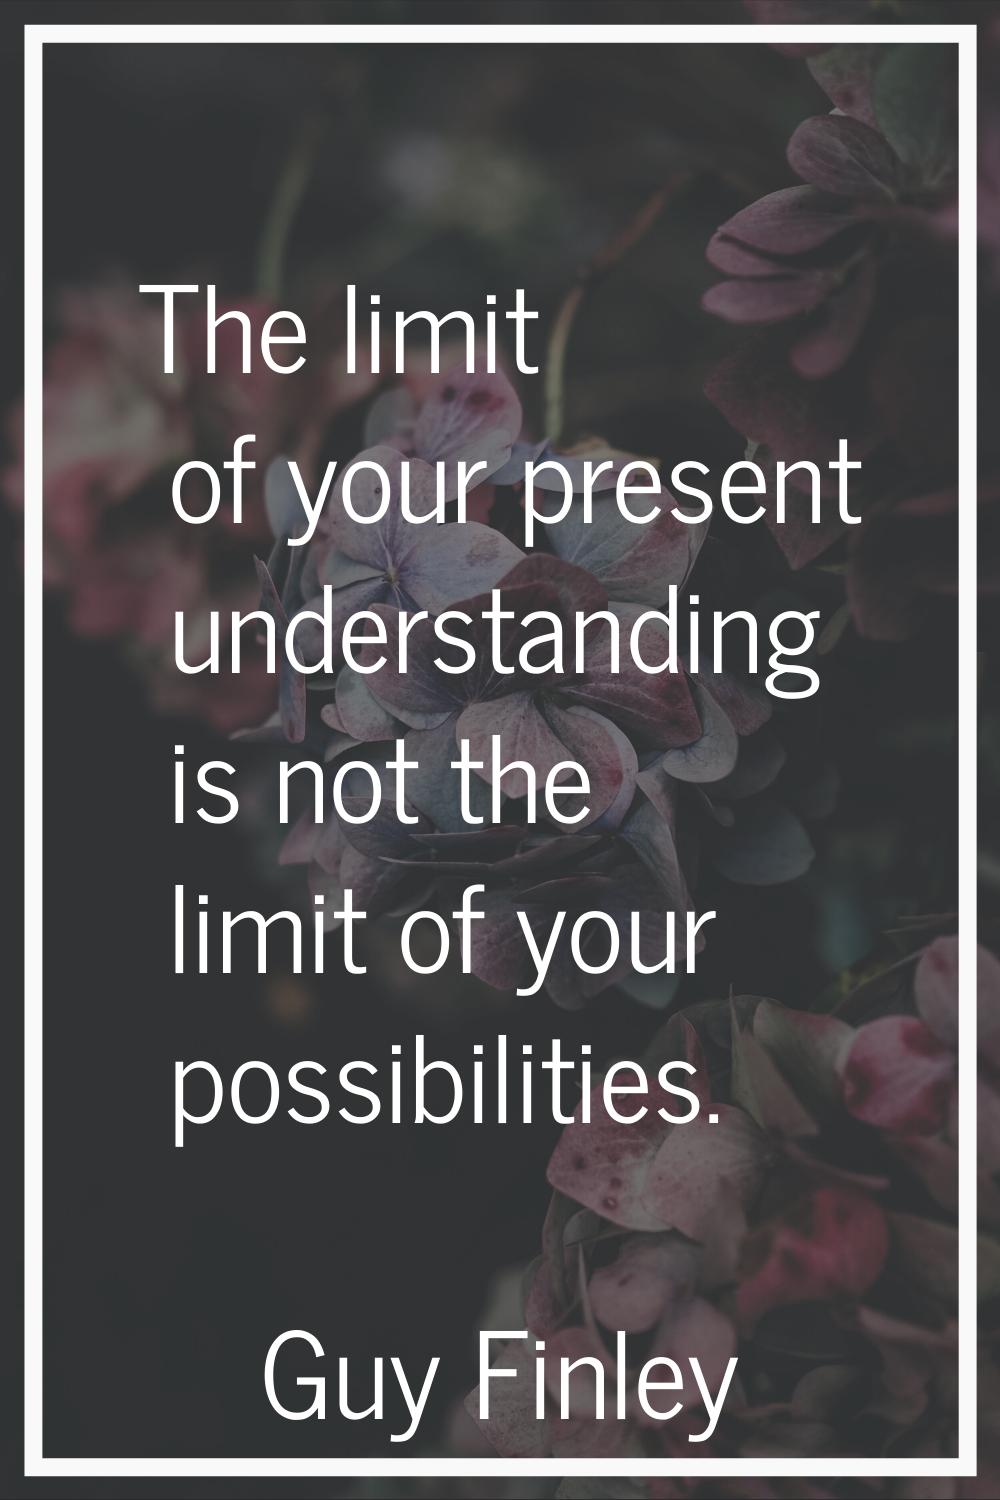 The limit of your present understanding is not the limit of your possibilities.